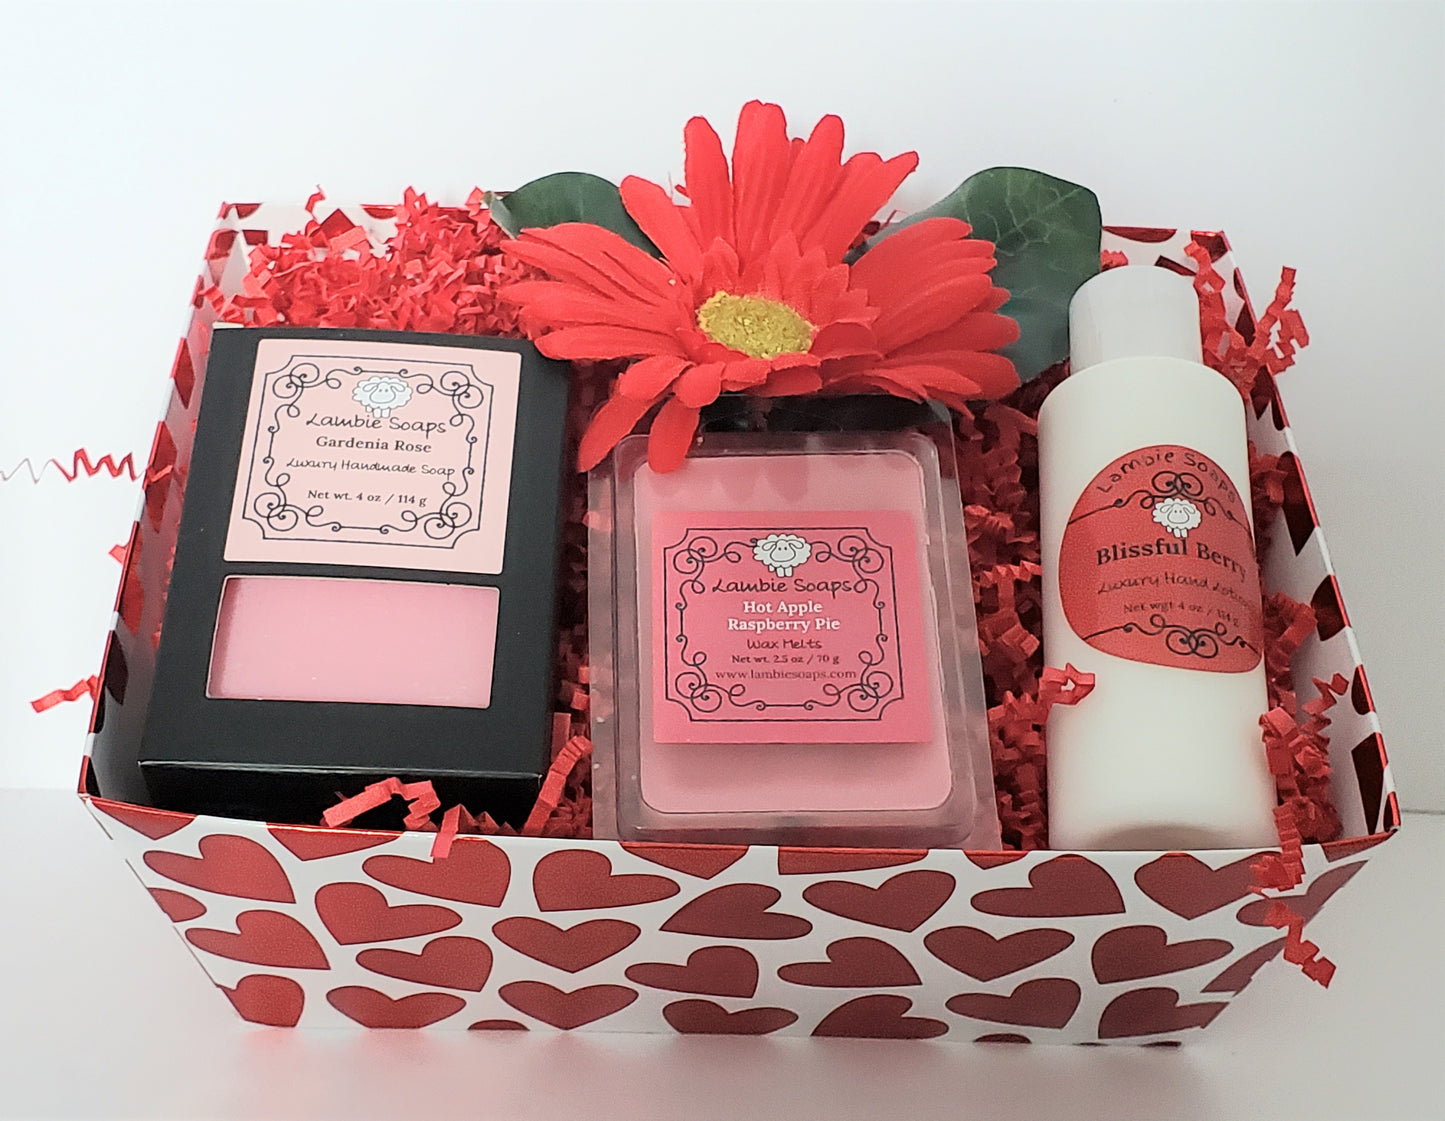 "HEARTS FOR HER" GIFT BASKET